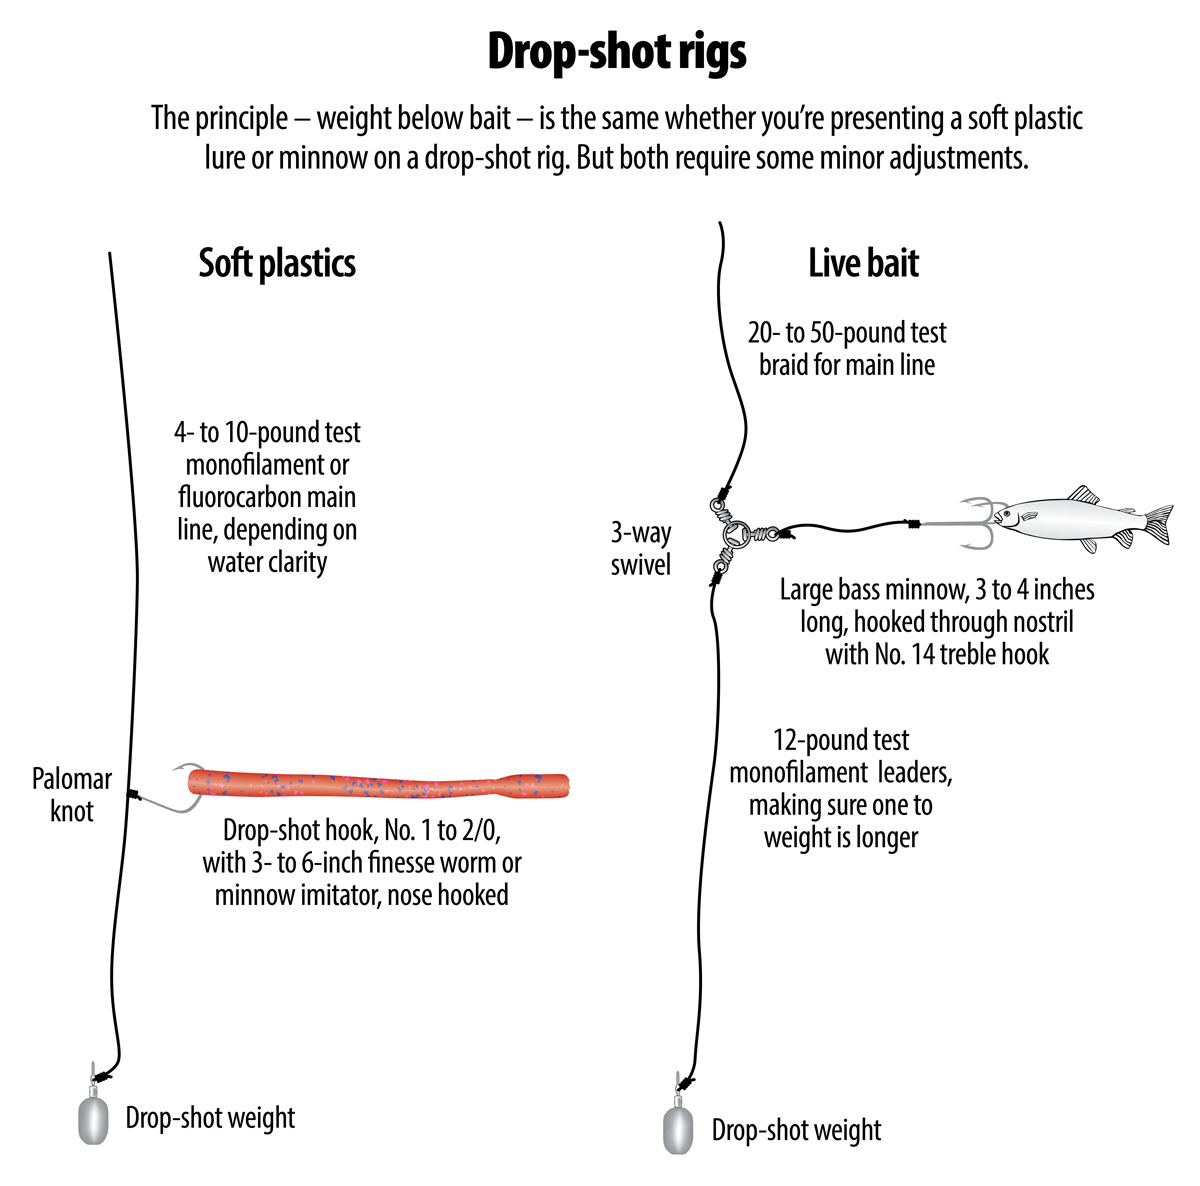 How to rig a drop-shot for soft plastics or live bait